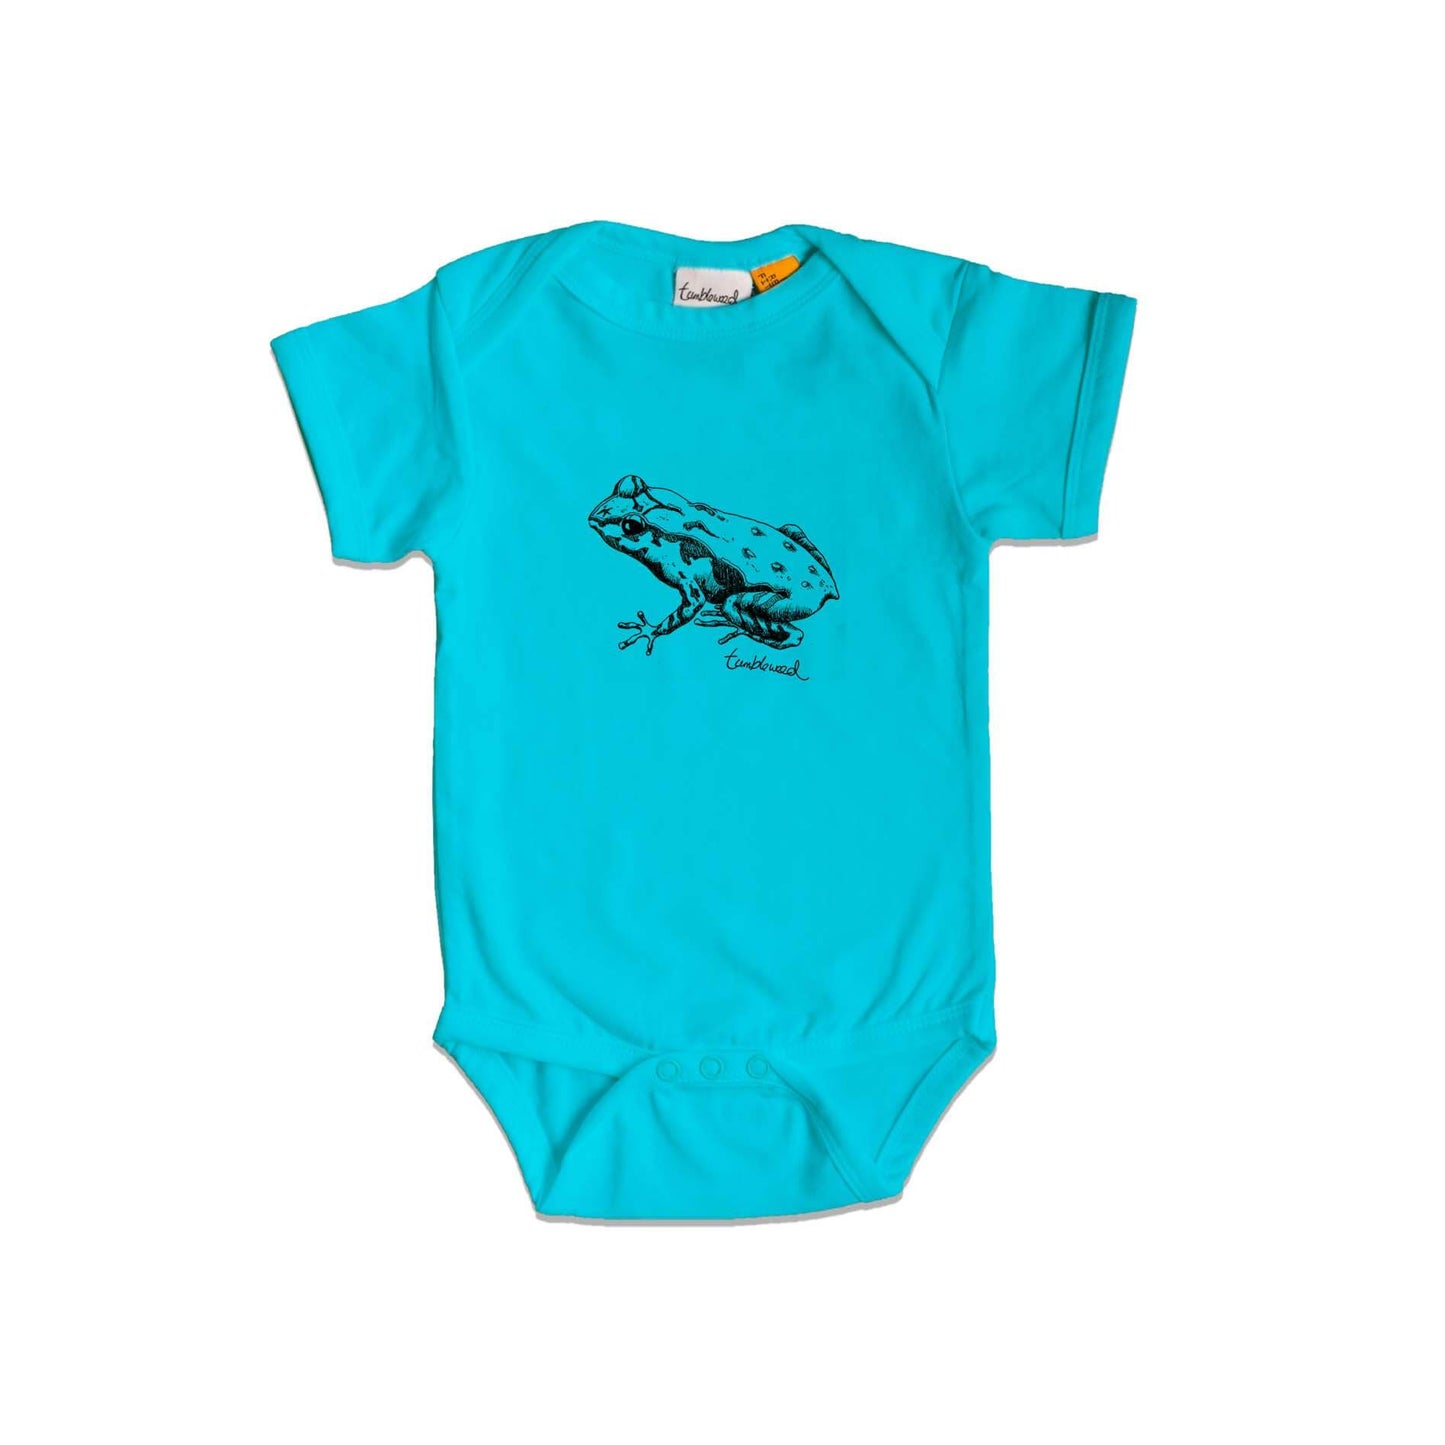 Short sleeved, blue, organic cotton, baby onesie featuring a screen printed Archey's Frog design.
 design.